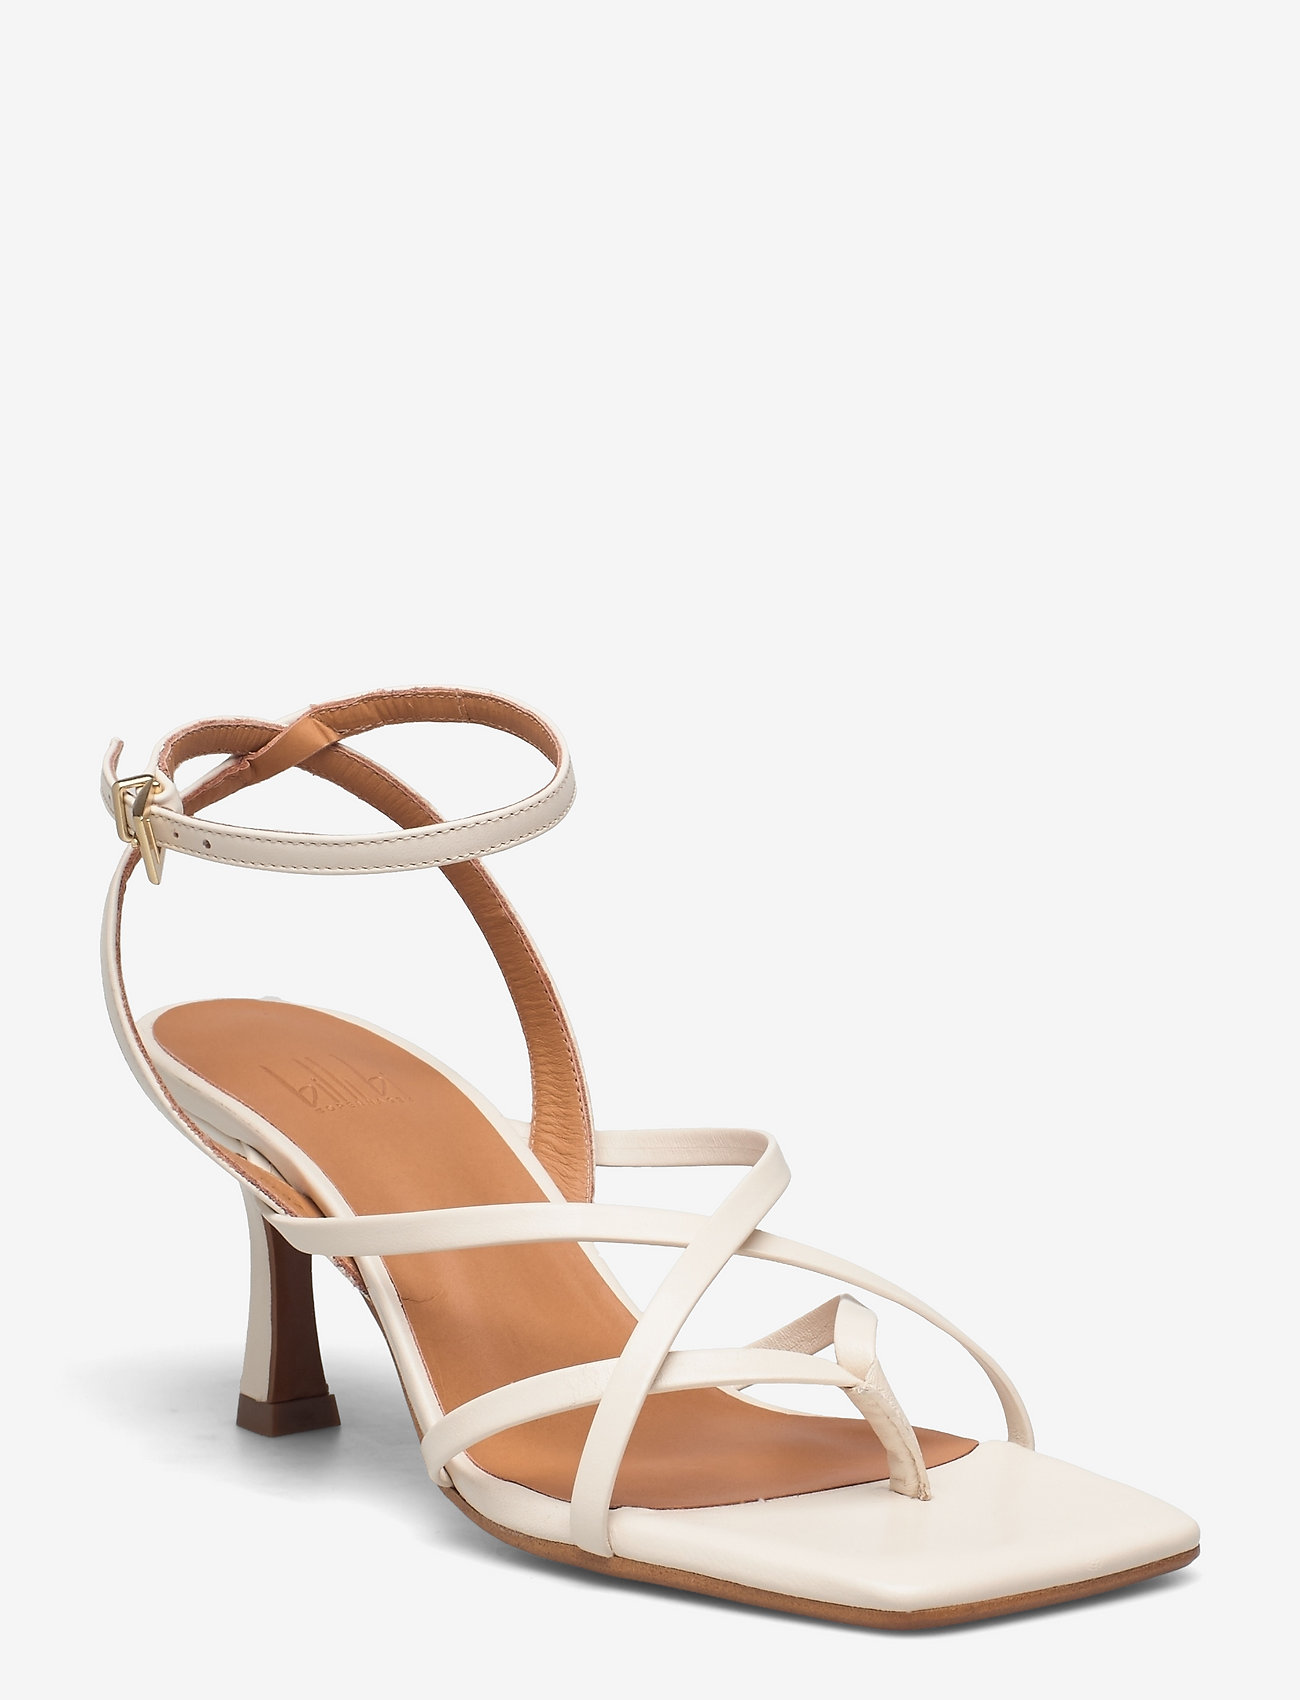 Billi Bi - Sandals - party wear at outlet prices - off white nappa 73 - 0